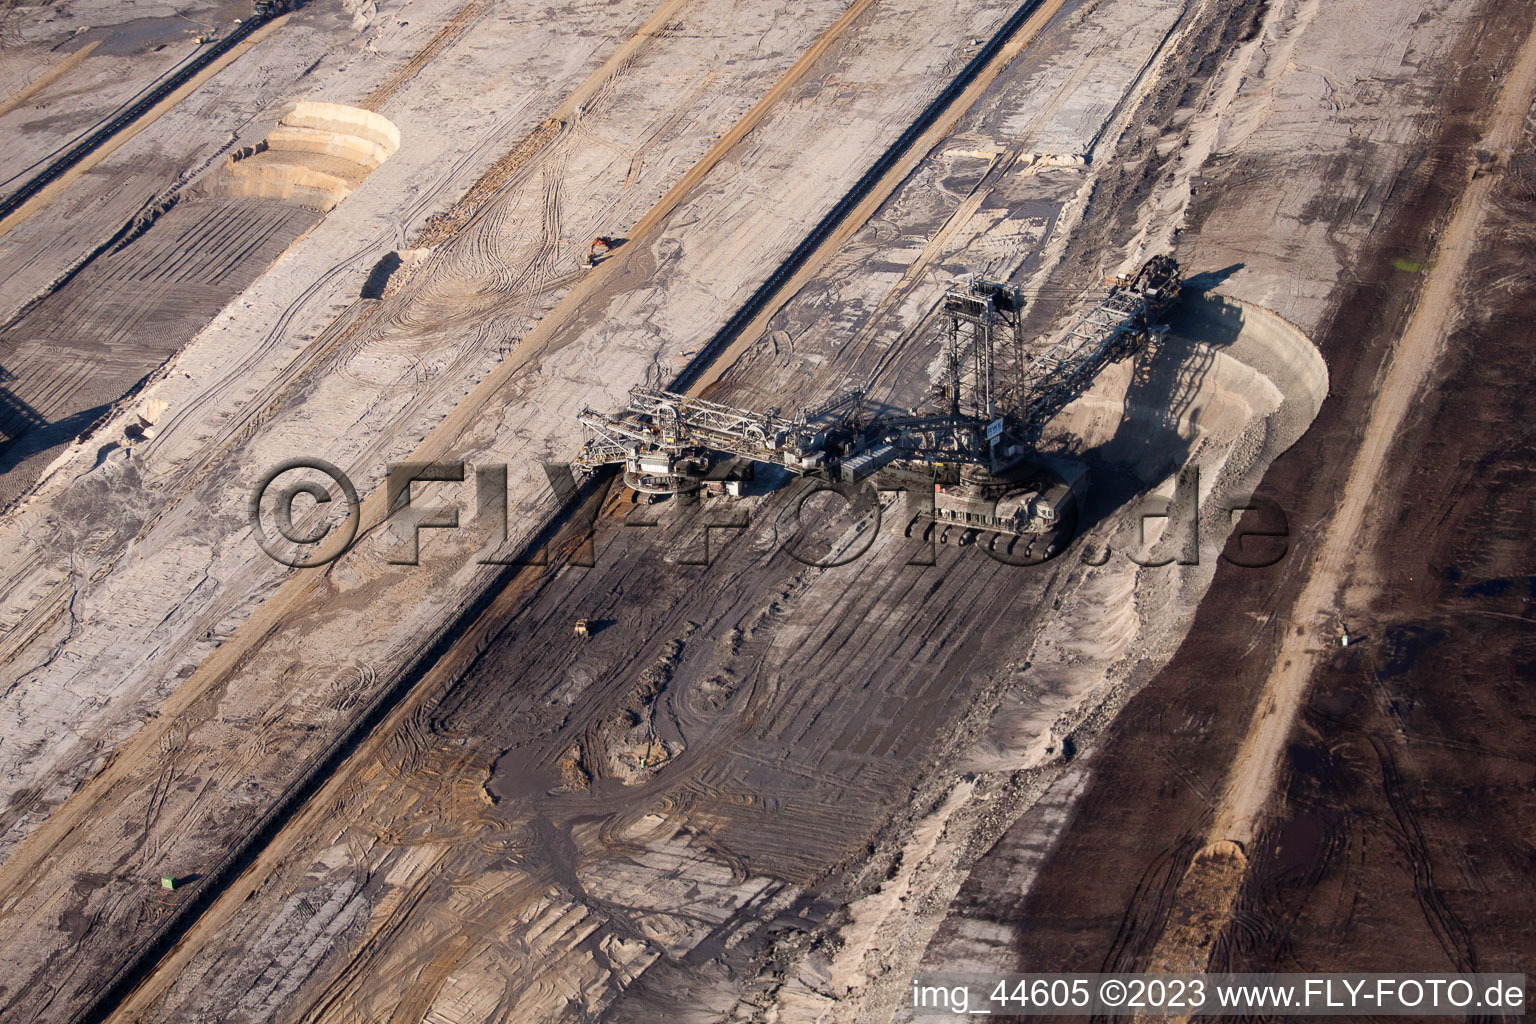 Opencast brown coal mining in Inden in the state North Rhine-Westphalia, Germany from the plane